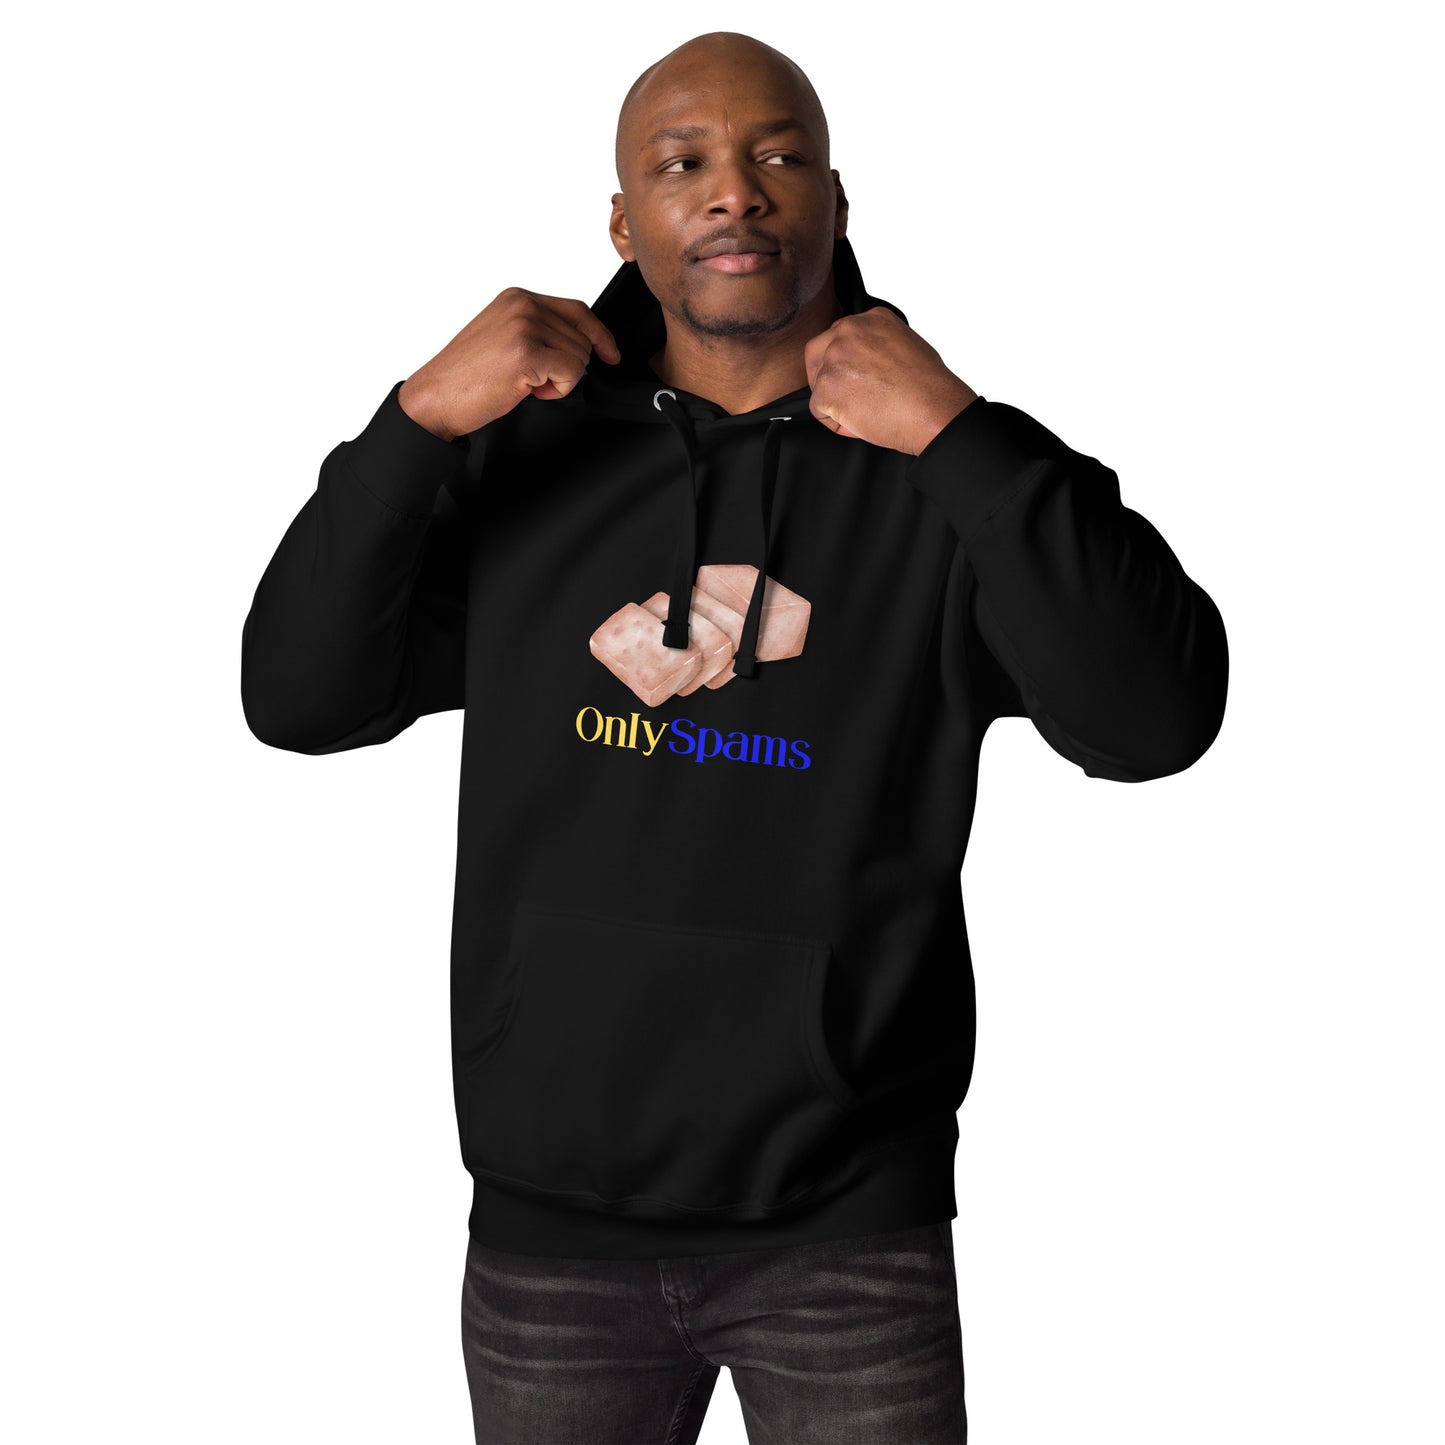 Only Spams Hoodie